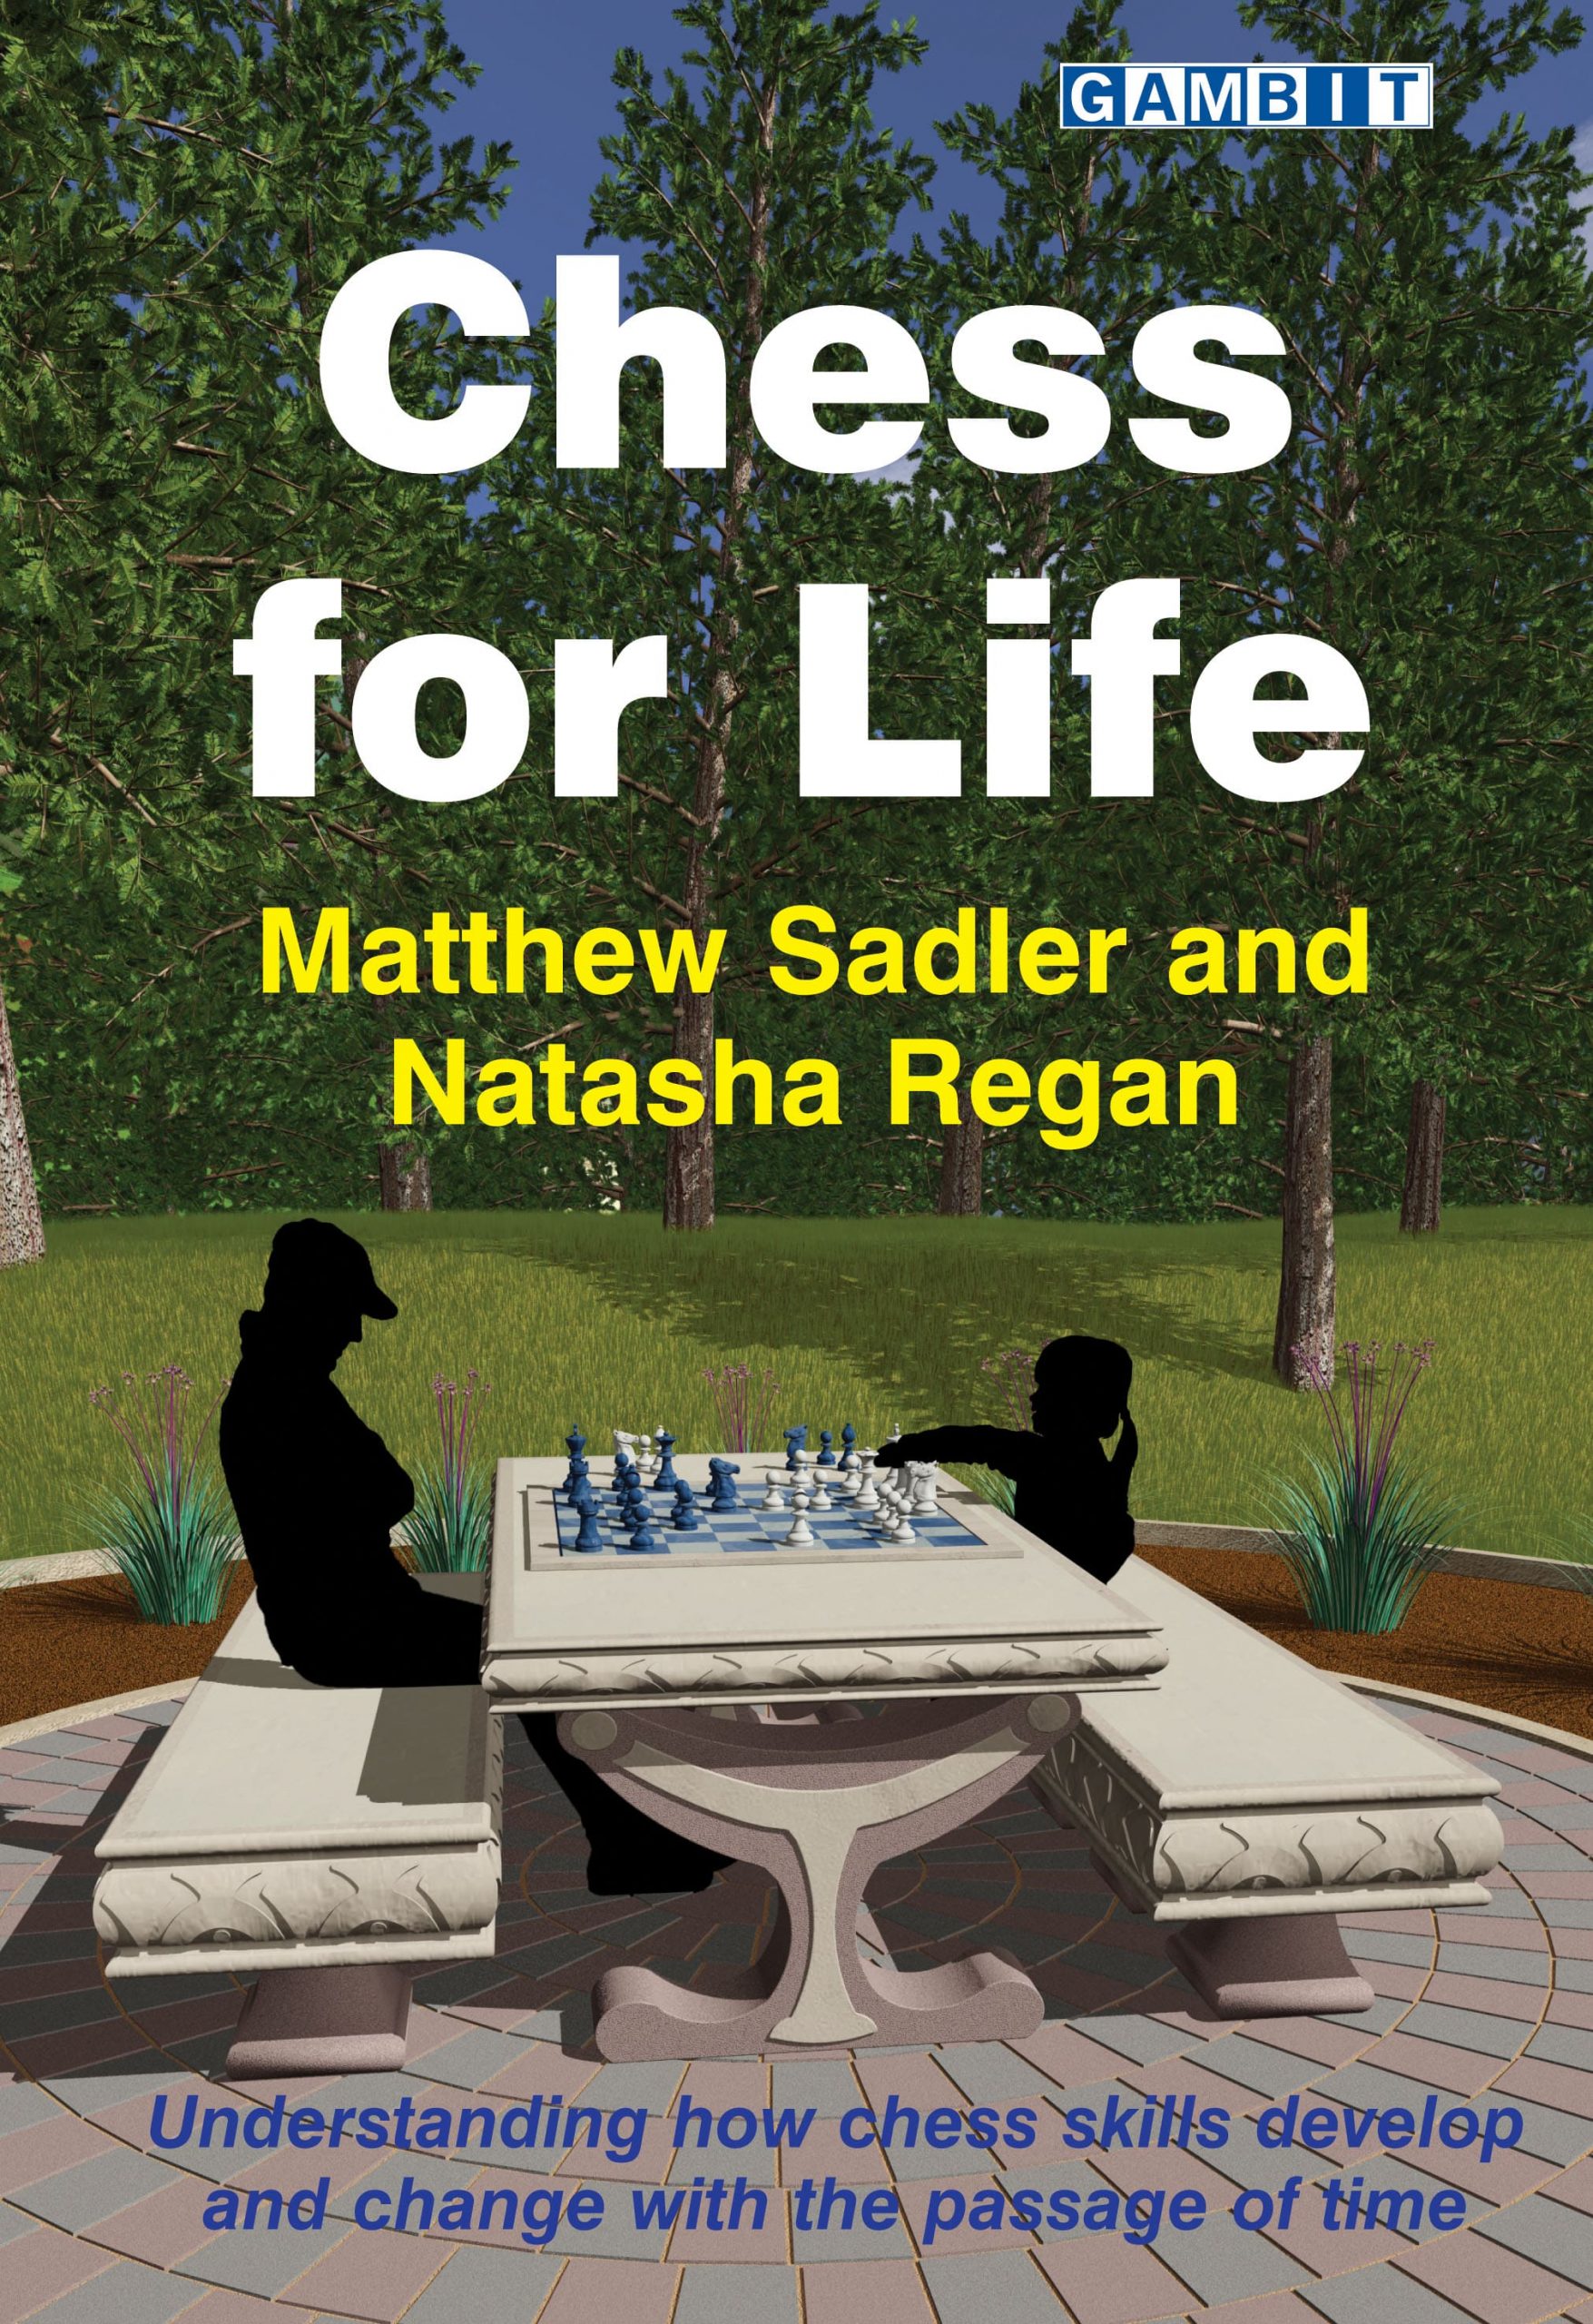 Chess For Life. Gambit. ISBN 978-1910093832.